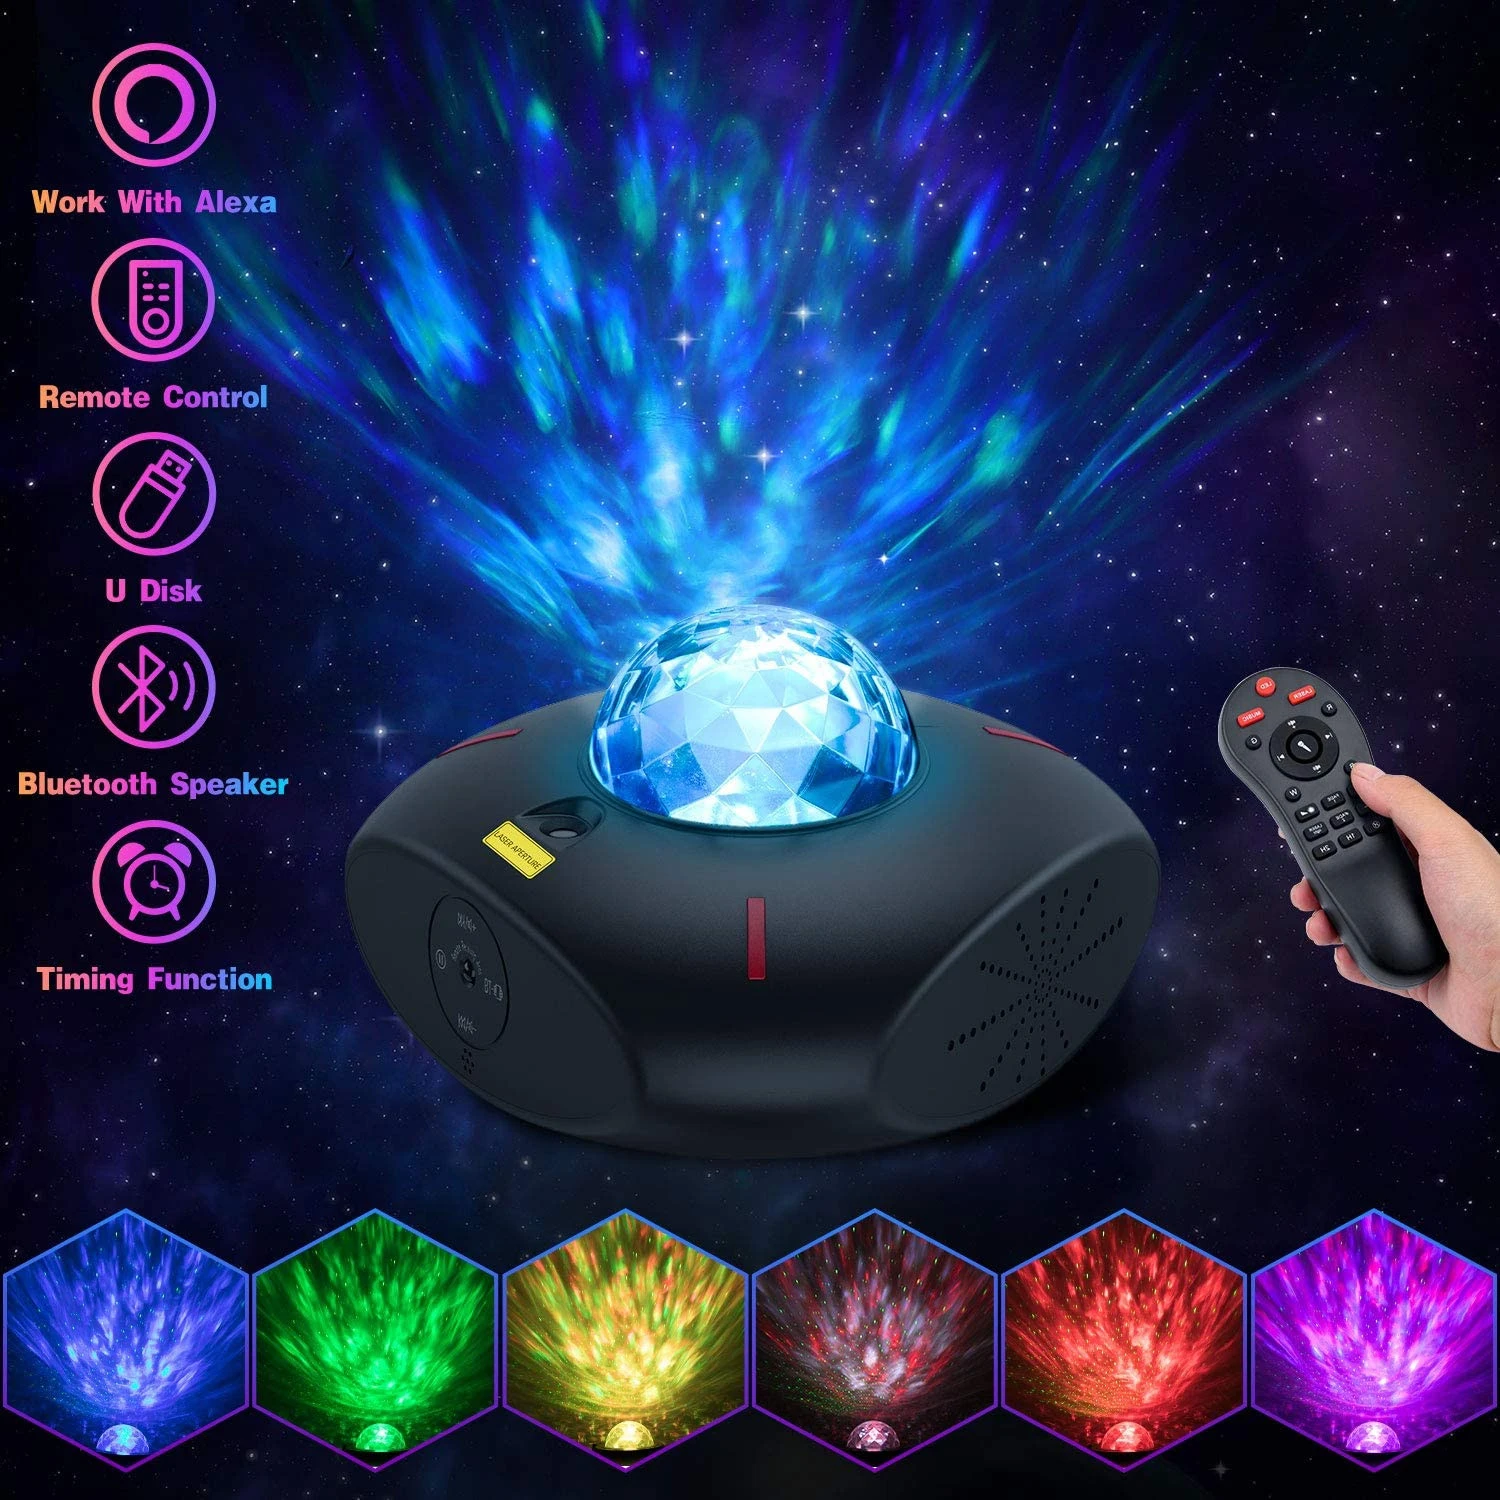 3D Night Light Led Projector Light Extreme Galaxy Projector Star Night Lamp ProjectorProjector Lamp Led Night Light Lamp